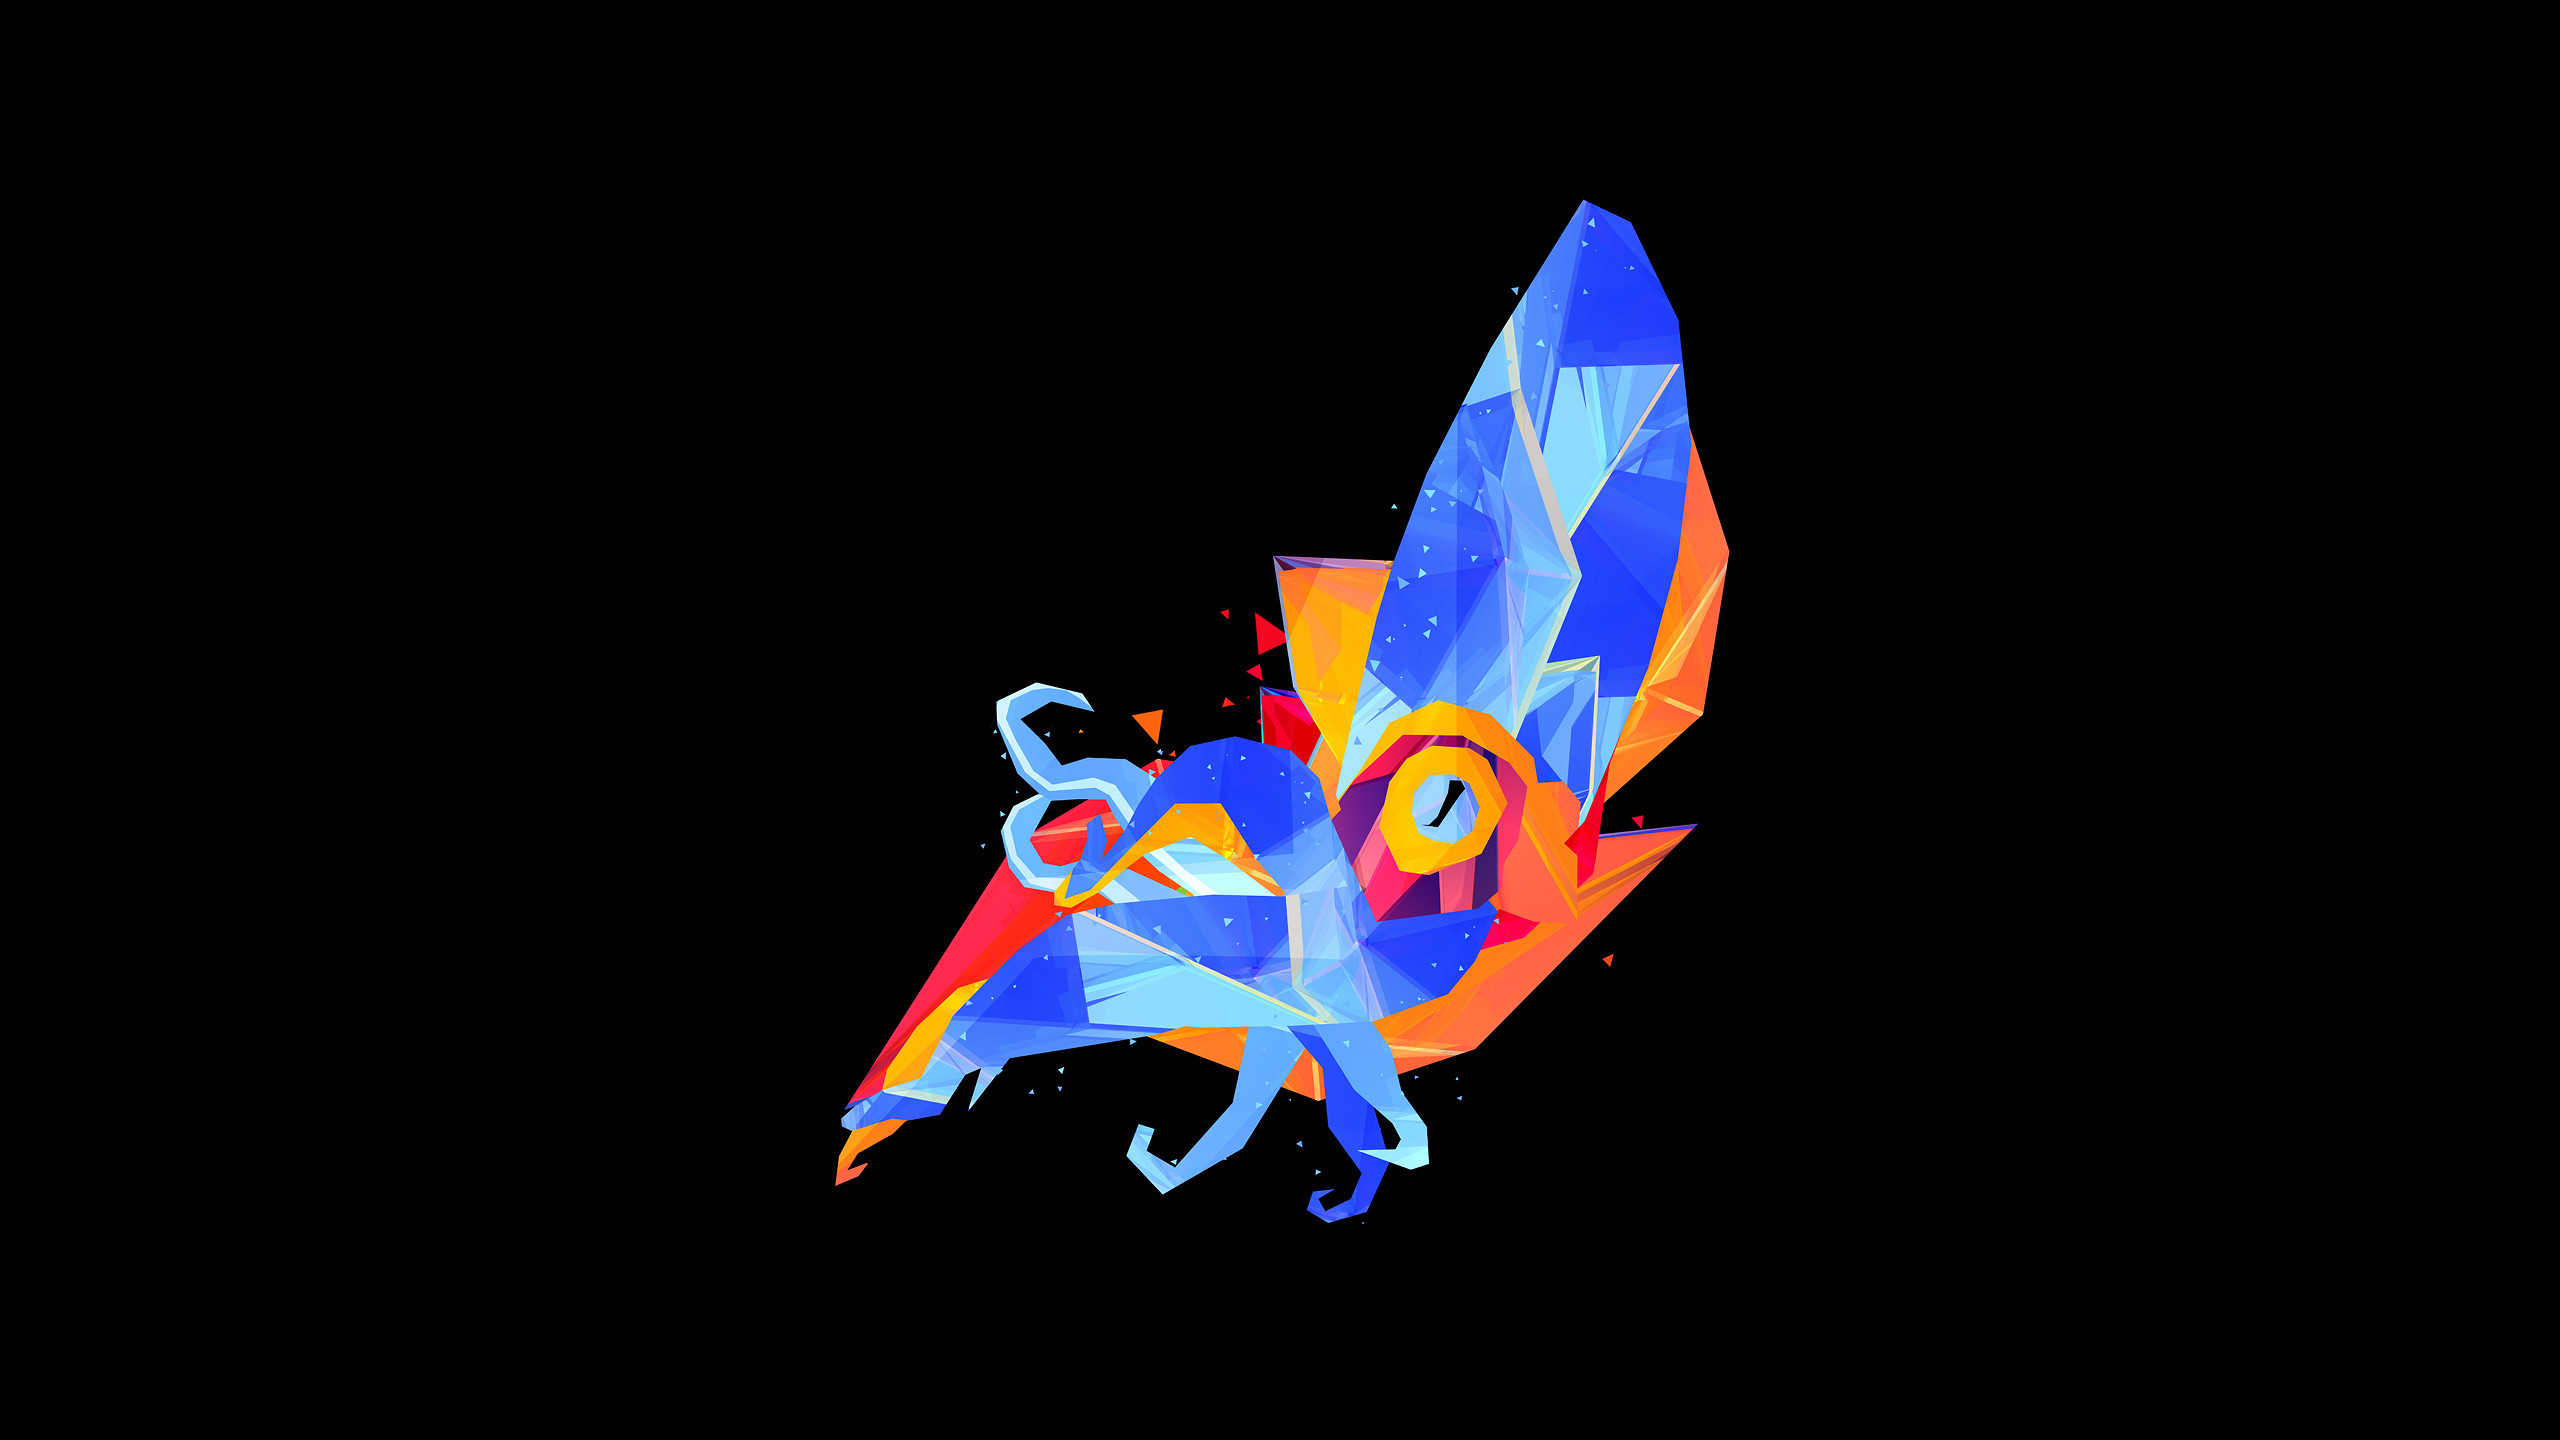 2560x1440 Colourful Geometric Animal Illustrations | DigitalArt.io Awesome animals  wallpapers | Animal wallpaper, Wallpaper and .